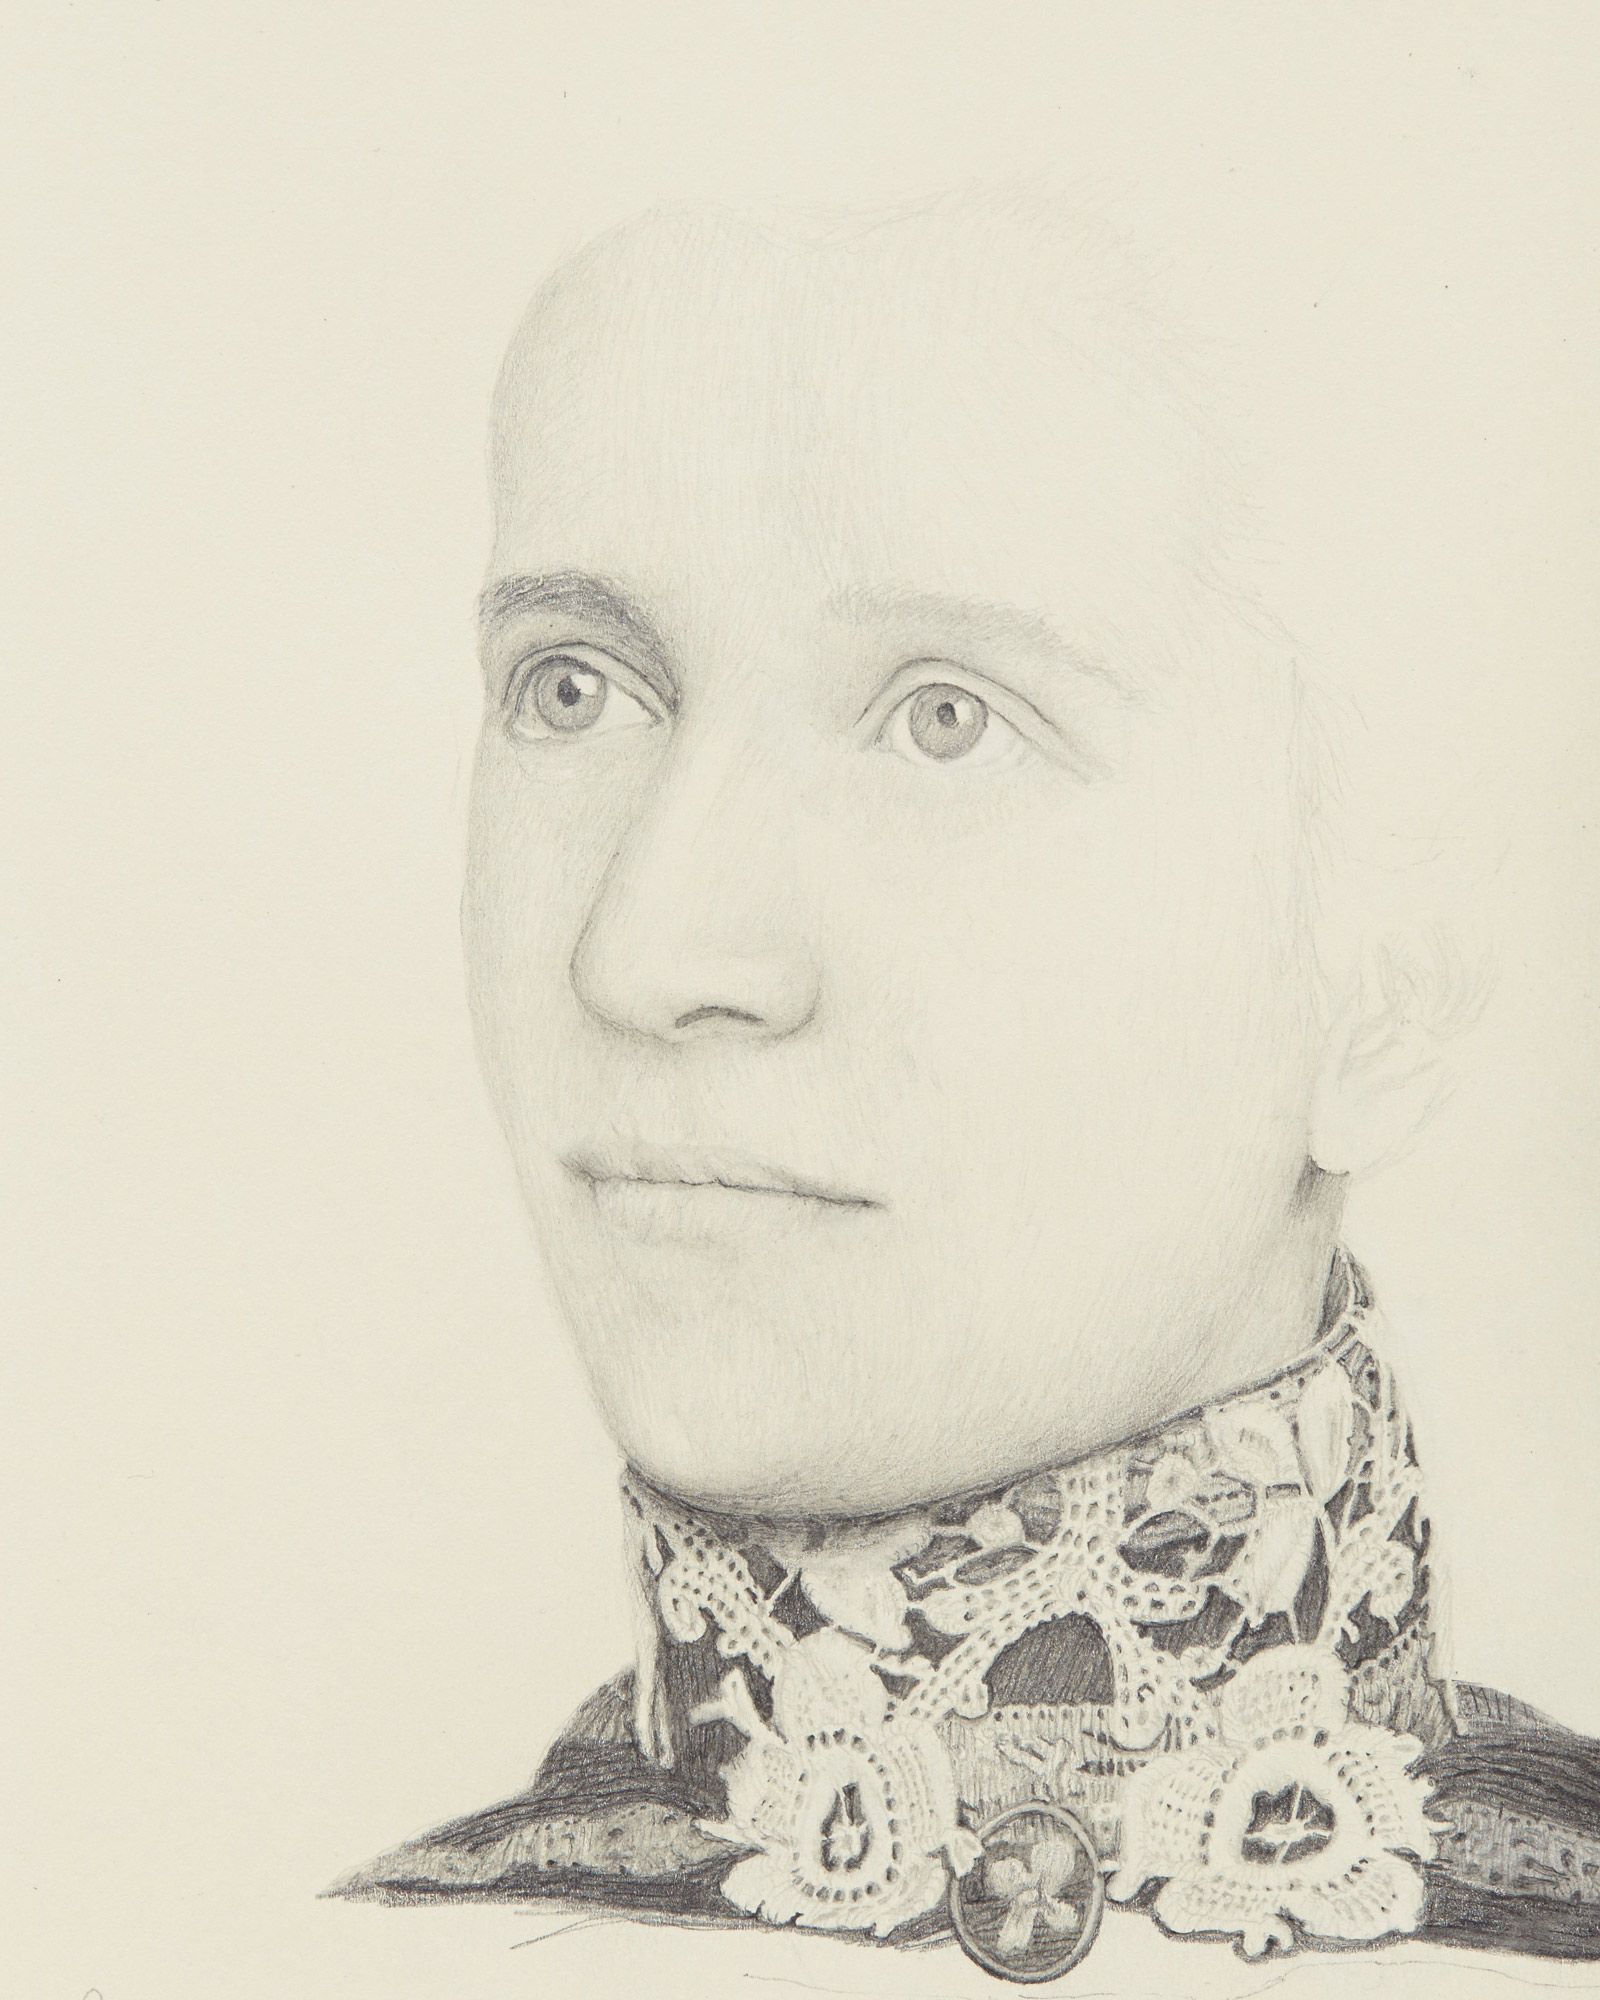 Detailed pencil drawing of a person's face, focusing on the eyes and nose, with a lace-adorned collar and a button detail.